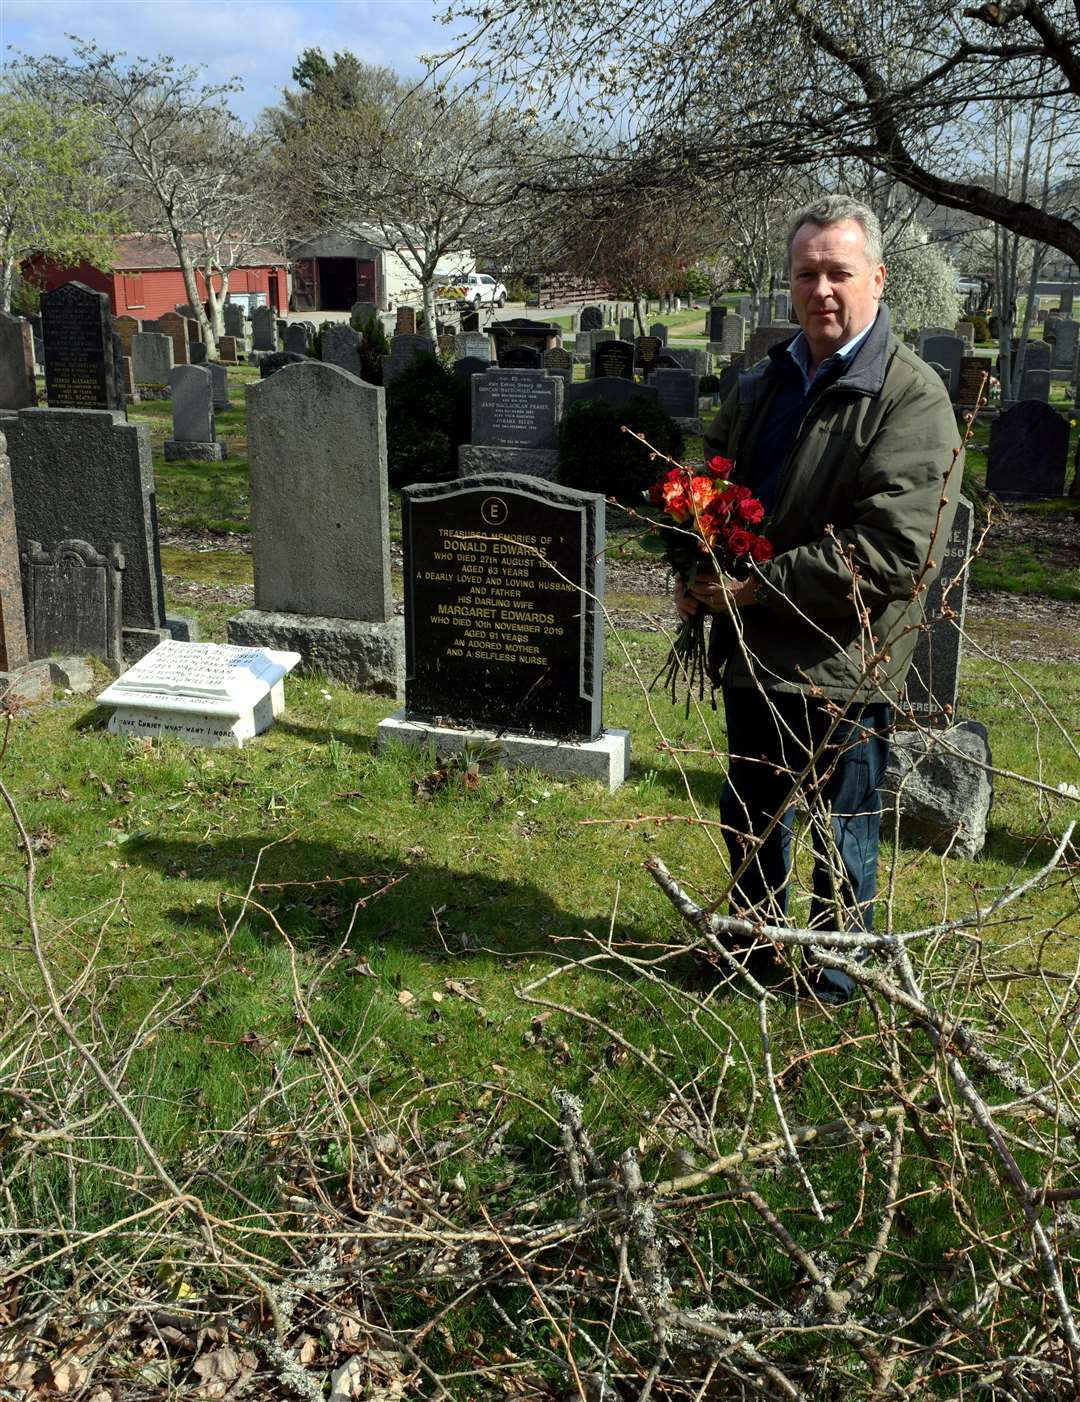 Mike Edwards in front of the grave of grandparents James Edwards and Joey Maclennan and parents Donald and Margaret Edwards.